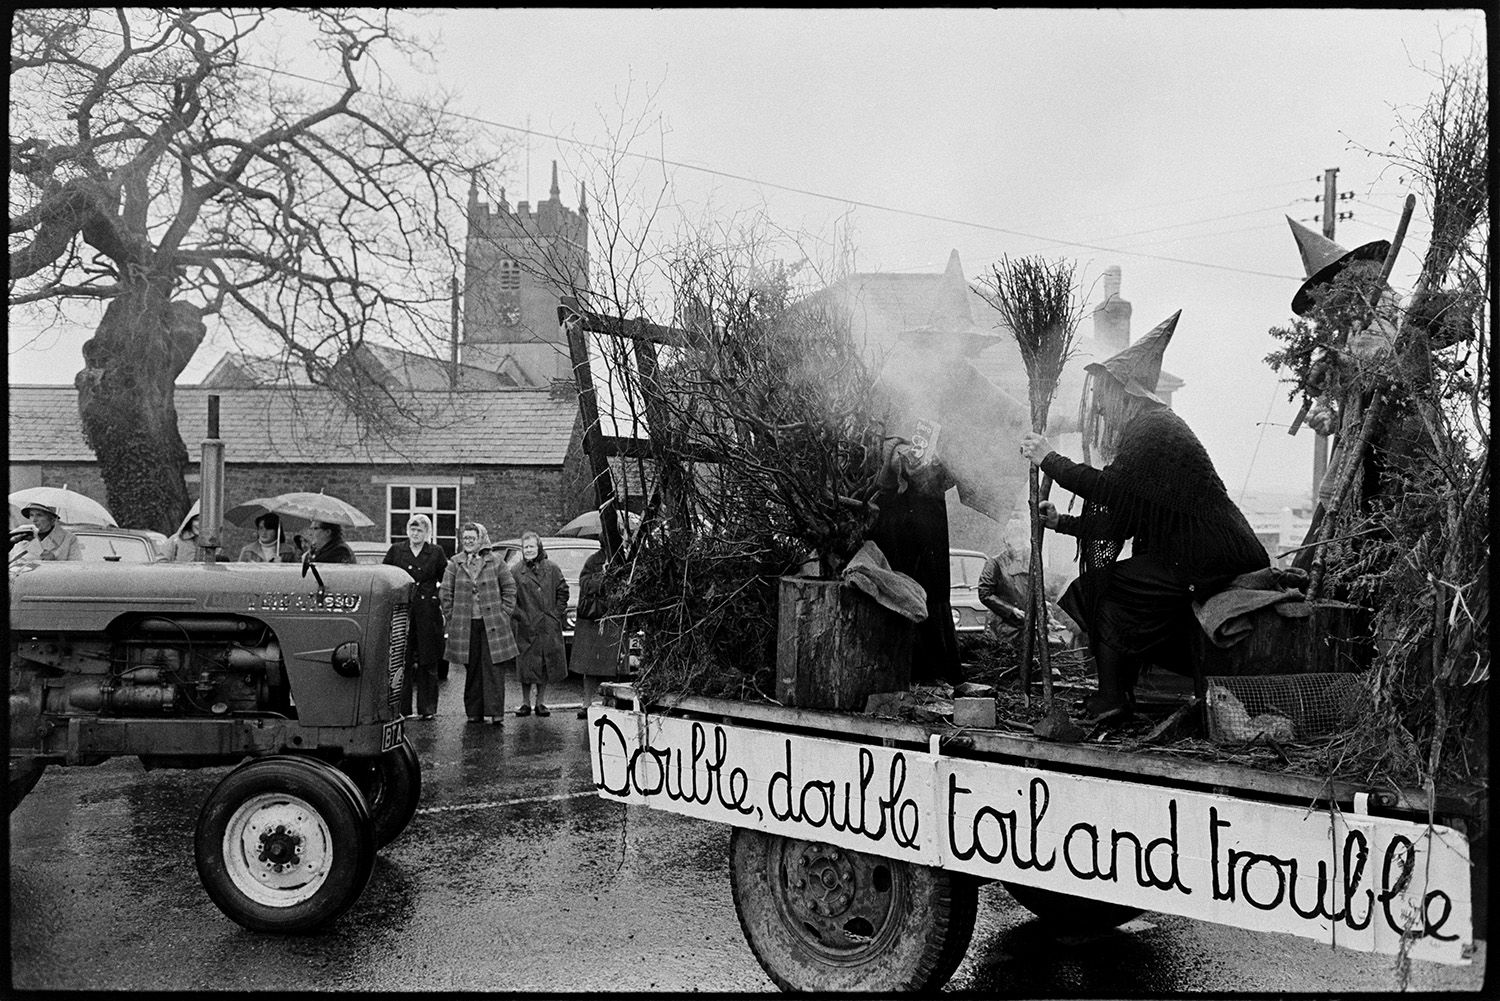 Carnival procession with Queen on decorated float, rain, spectators and fancy dress. 
[A carnival float in Shebbear Carnival with people dressed as witches. A banner on the side of the trailer reads 'Double, double, toil and trouble'. Spectators are watching the procession in the rain. Shebbear church tower can be seen in the background.]